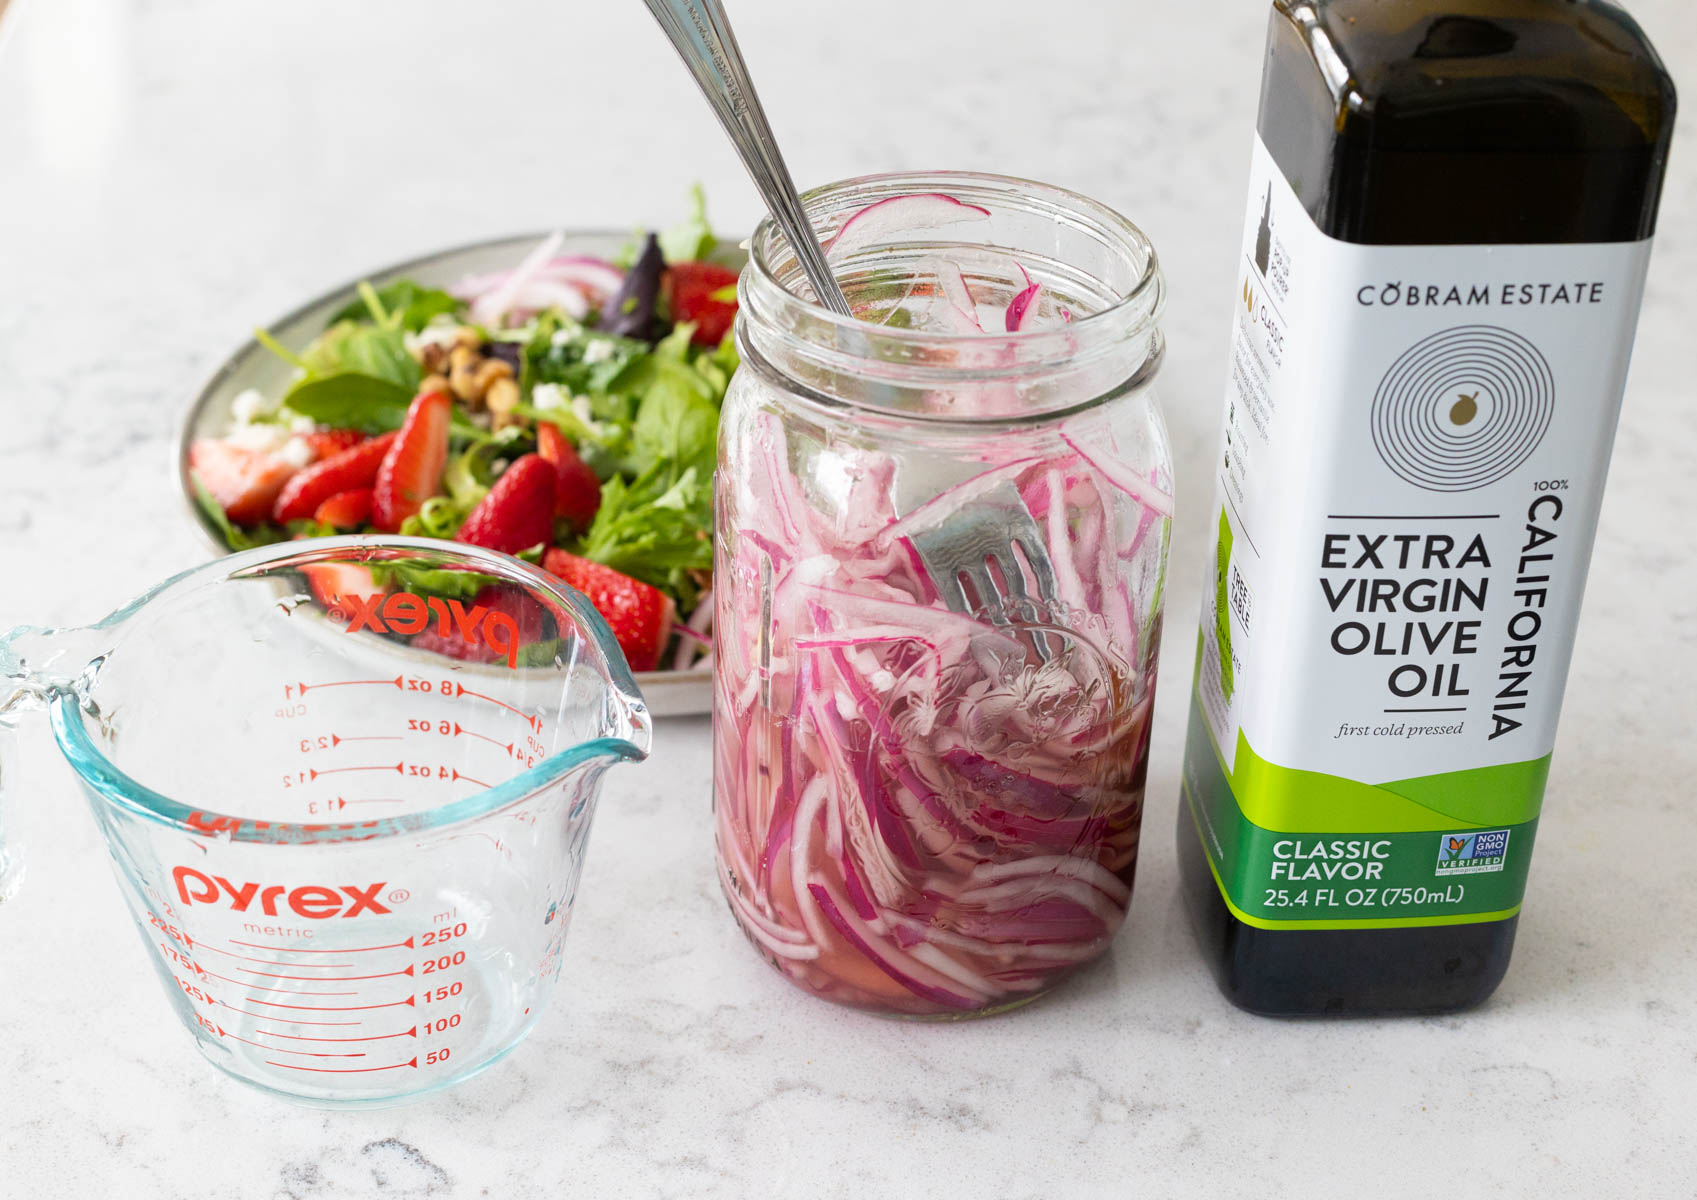 The jar of pickled red onions and olive oil are on the counter by the salad.